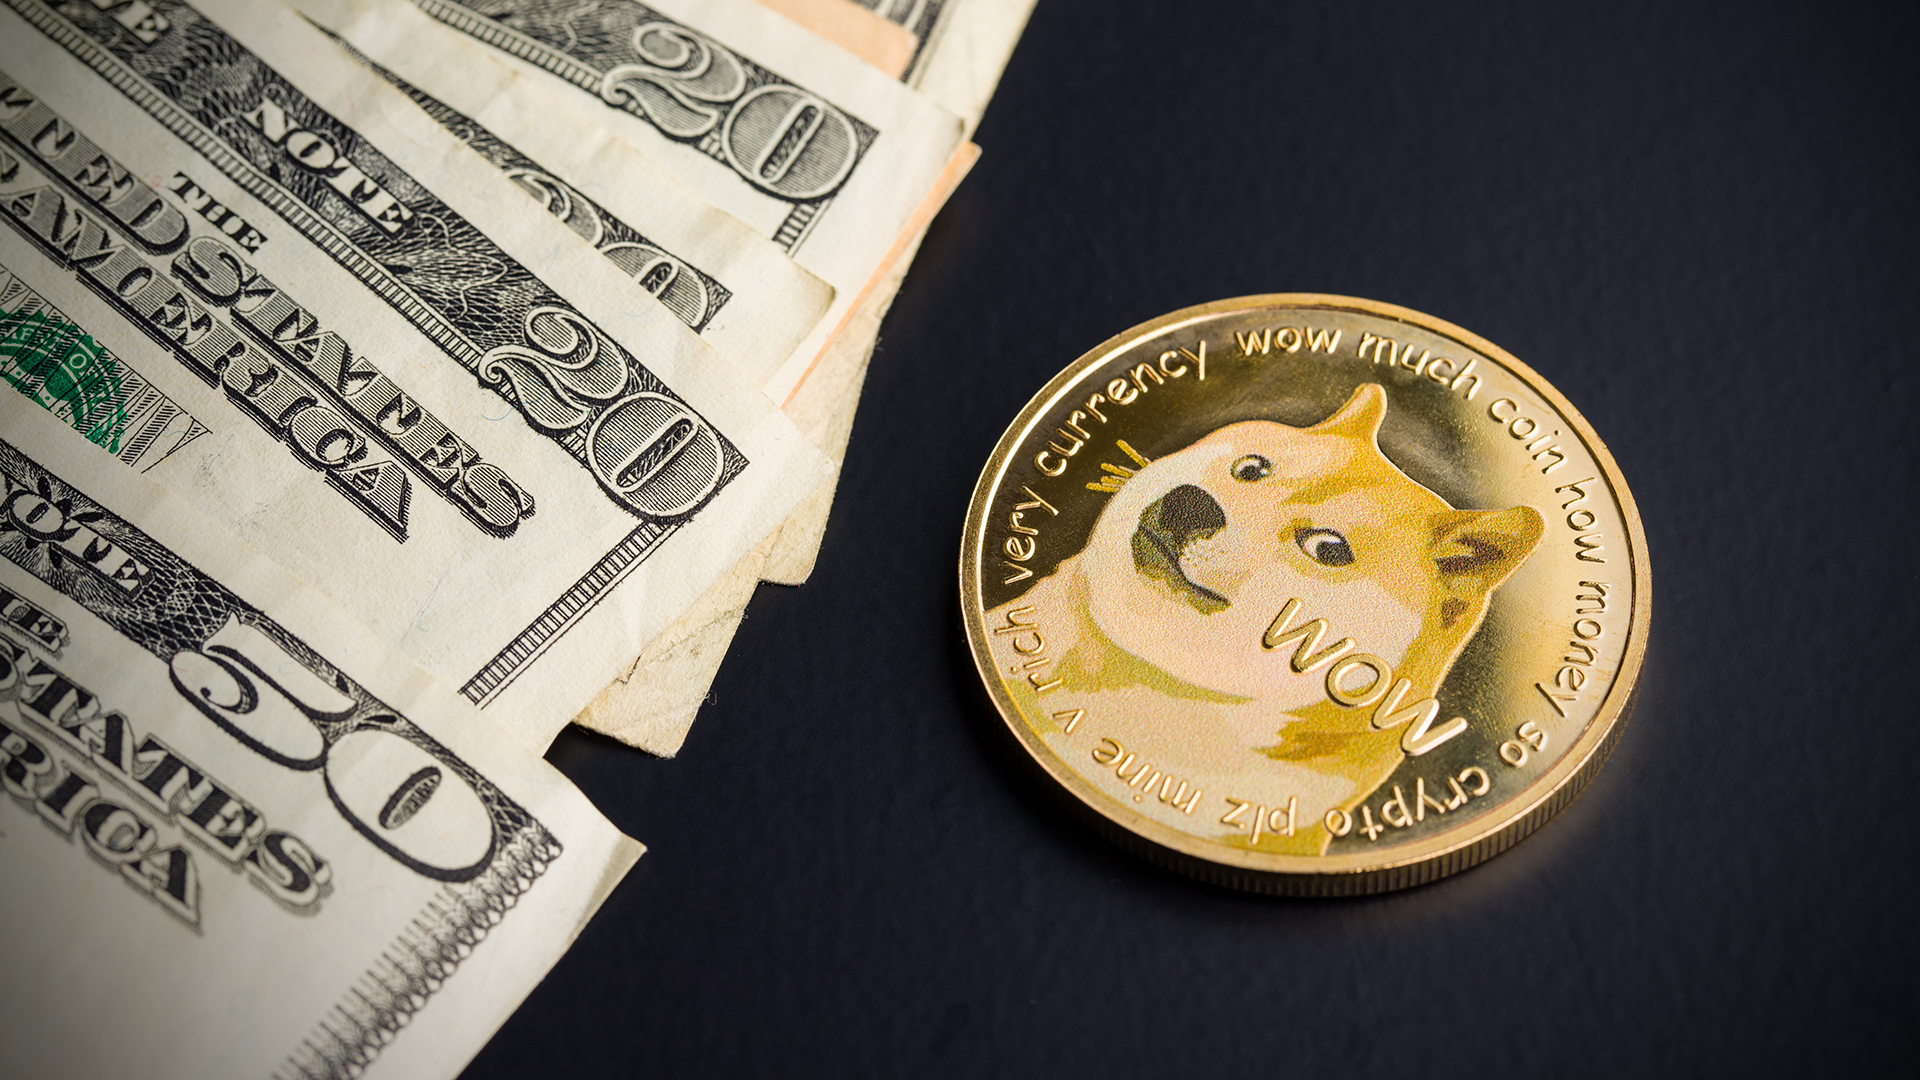 Top cryptocurrency listed — Dogecoin